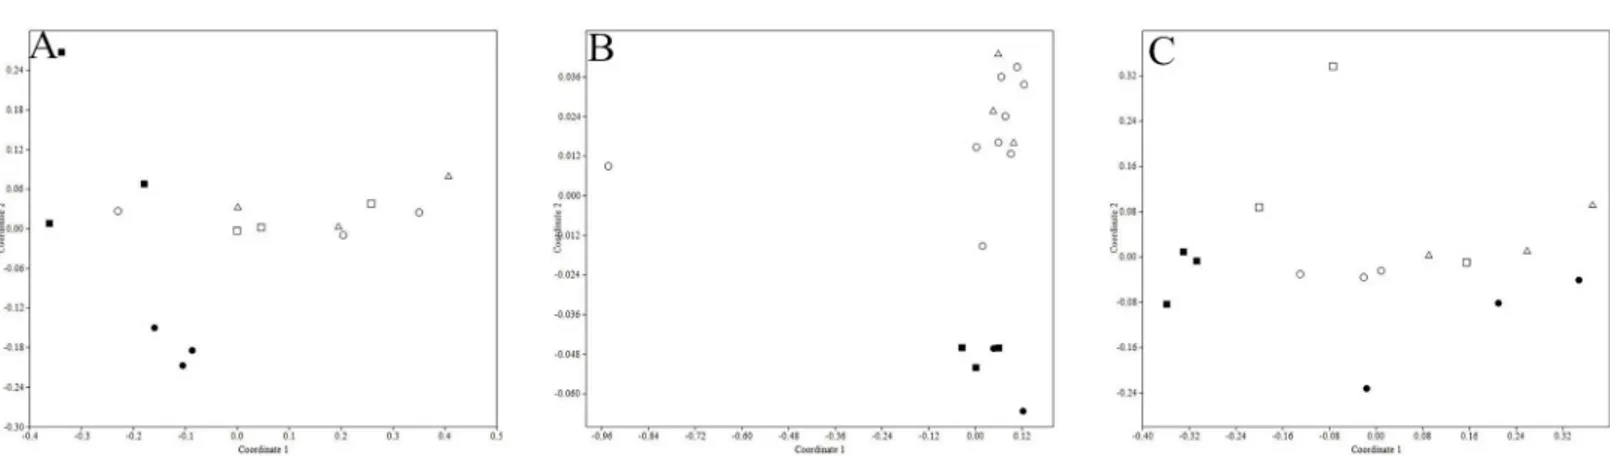 Fig 4. Distribution characteristics of ARGs in soils of cattle farms (A), poultry farms (B) and porcine farms (C) located in five different regions